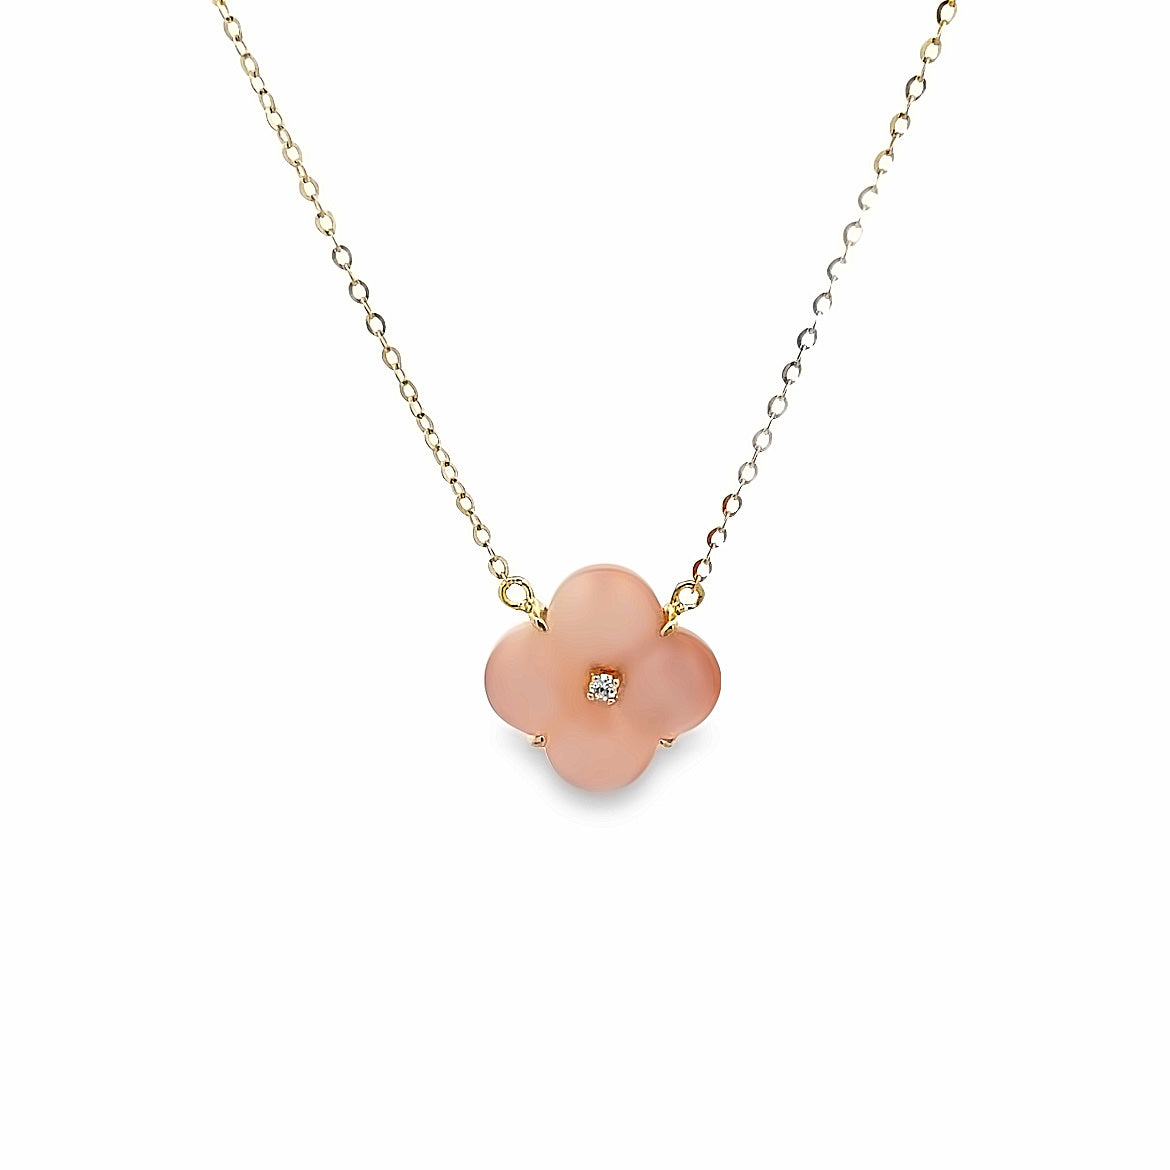 18K GOLD FLOWER MEDIUM NECKLACE WITH PINK MOTHER OF PEARL